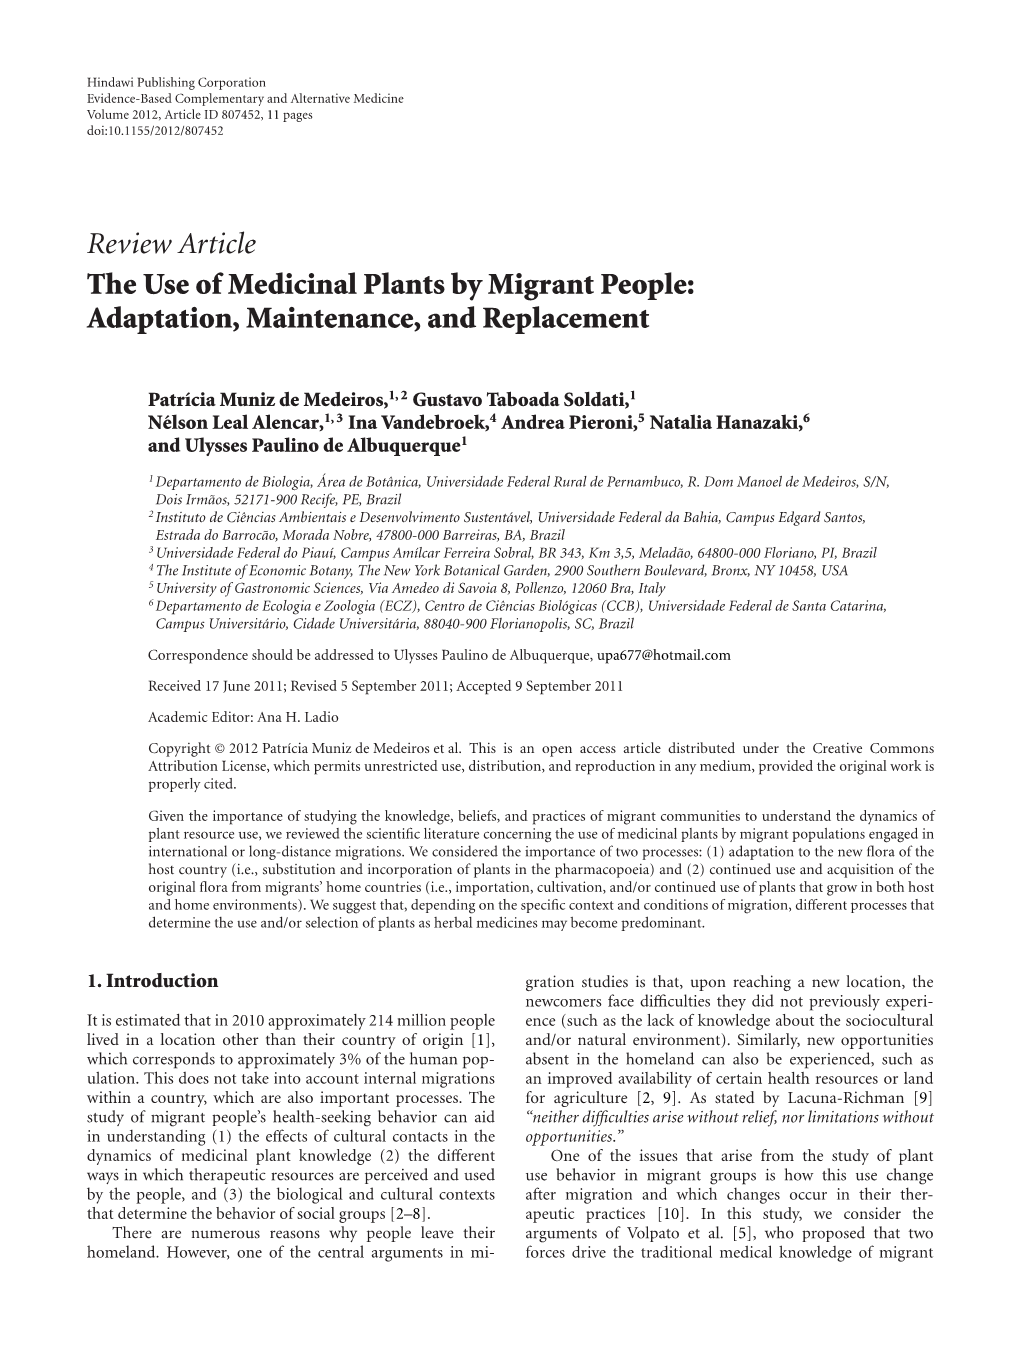 The Use of Medicinal Plants by Migrant People: Adaptation, Maintenance, and Replacement